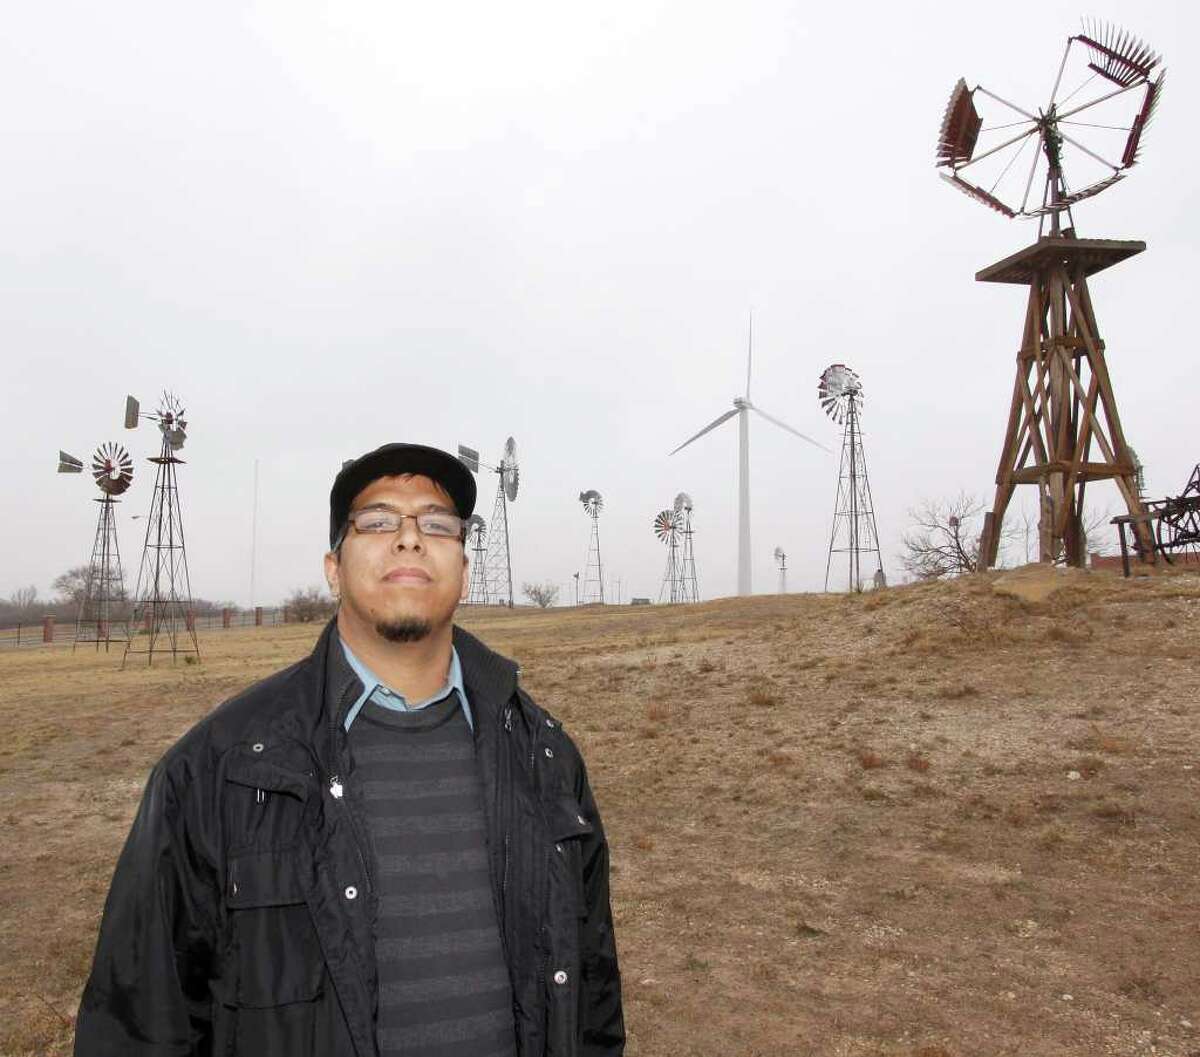 DARREL THOMAS : FOR THE CHRONICLE FAMILY MAN: Antonio Lara chose to study wind energy because he wants to be in a field where jobs are available so he can support his wife and 2-year-old daughter.